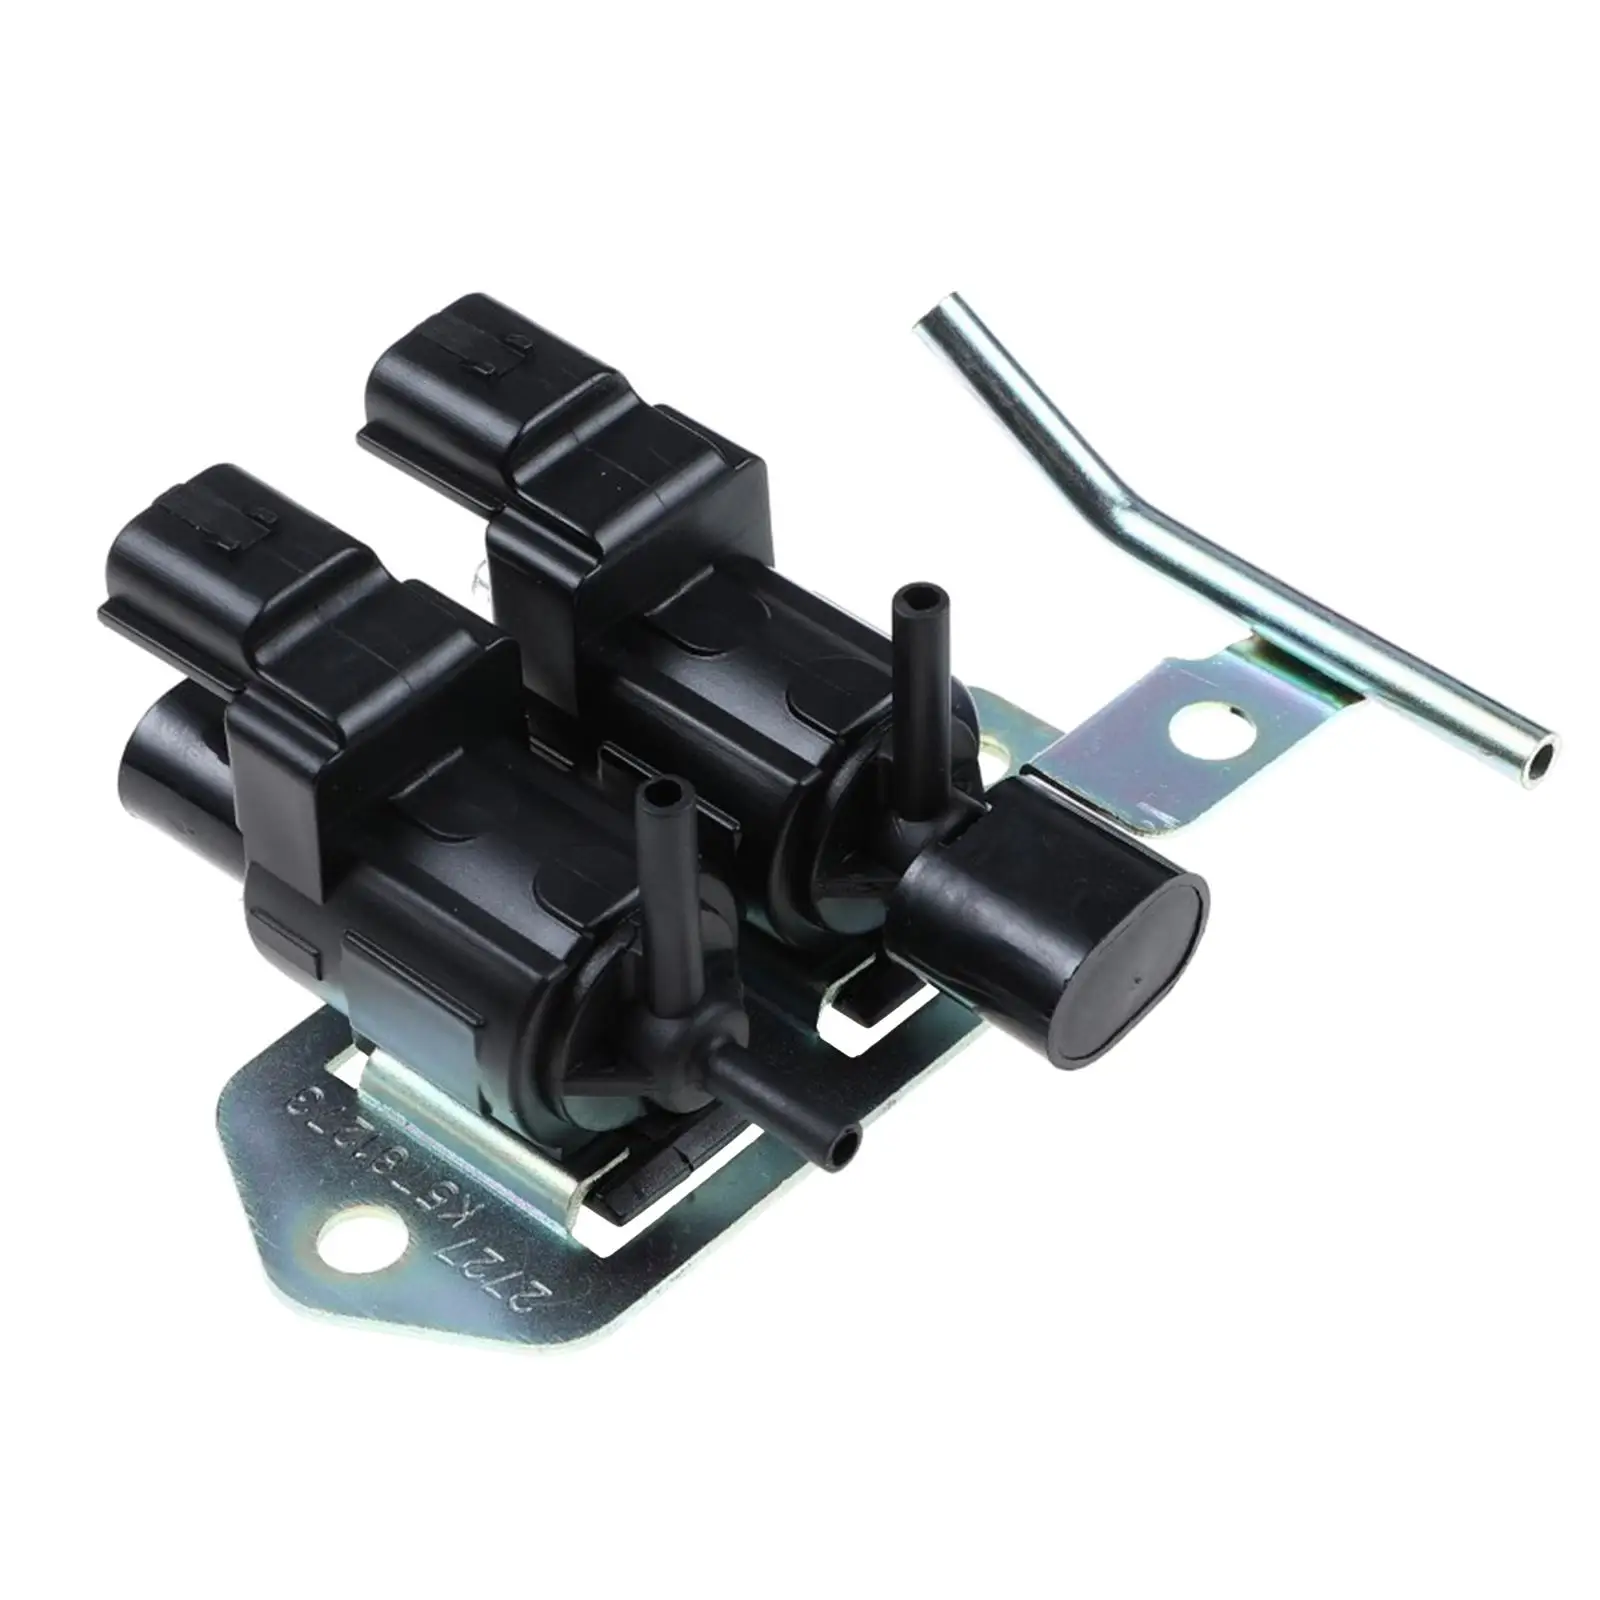 Vehicle Clutch 4WD Select Control Solenoid Valve MR534632 Replacement K5T81273 for Mitsubishi IO Pajero 4G93 4G94 99-05